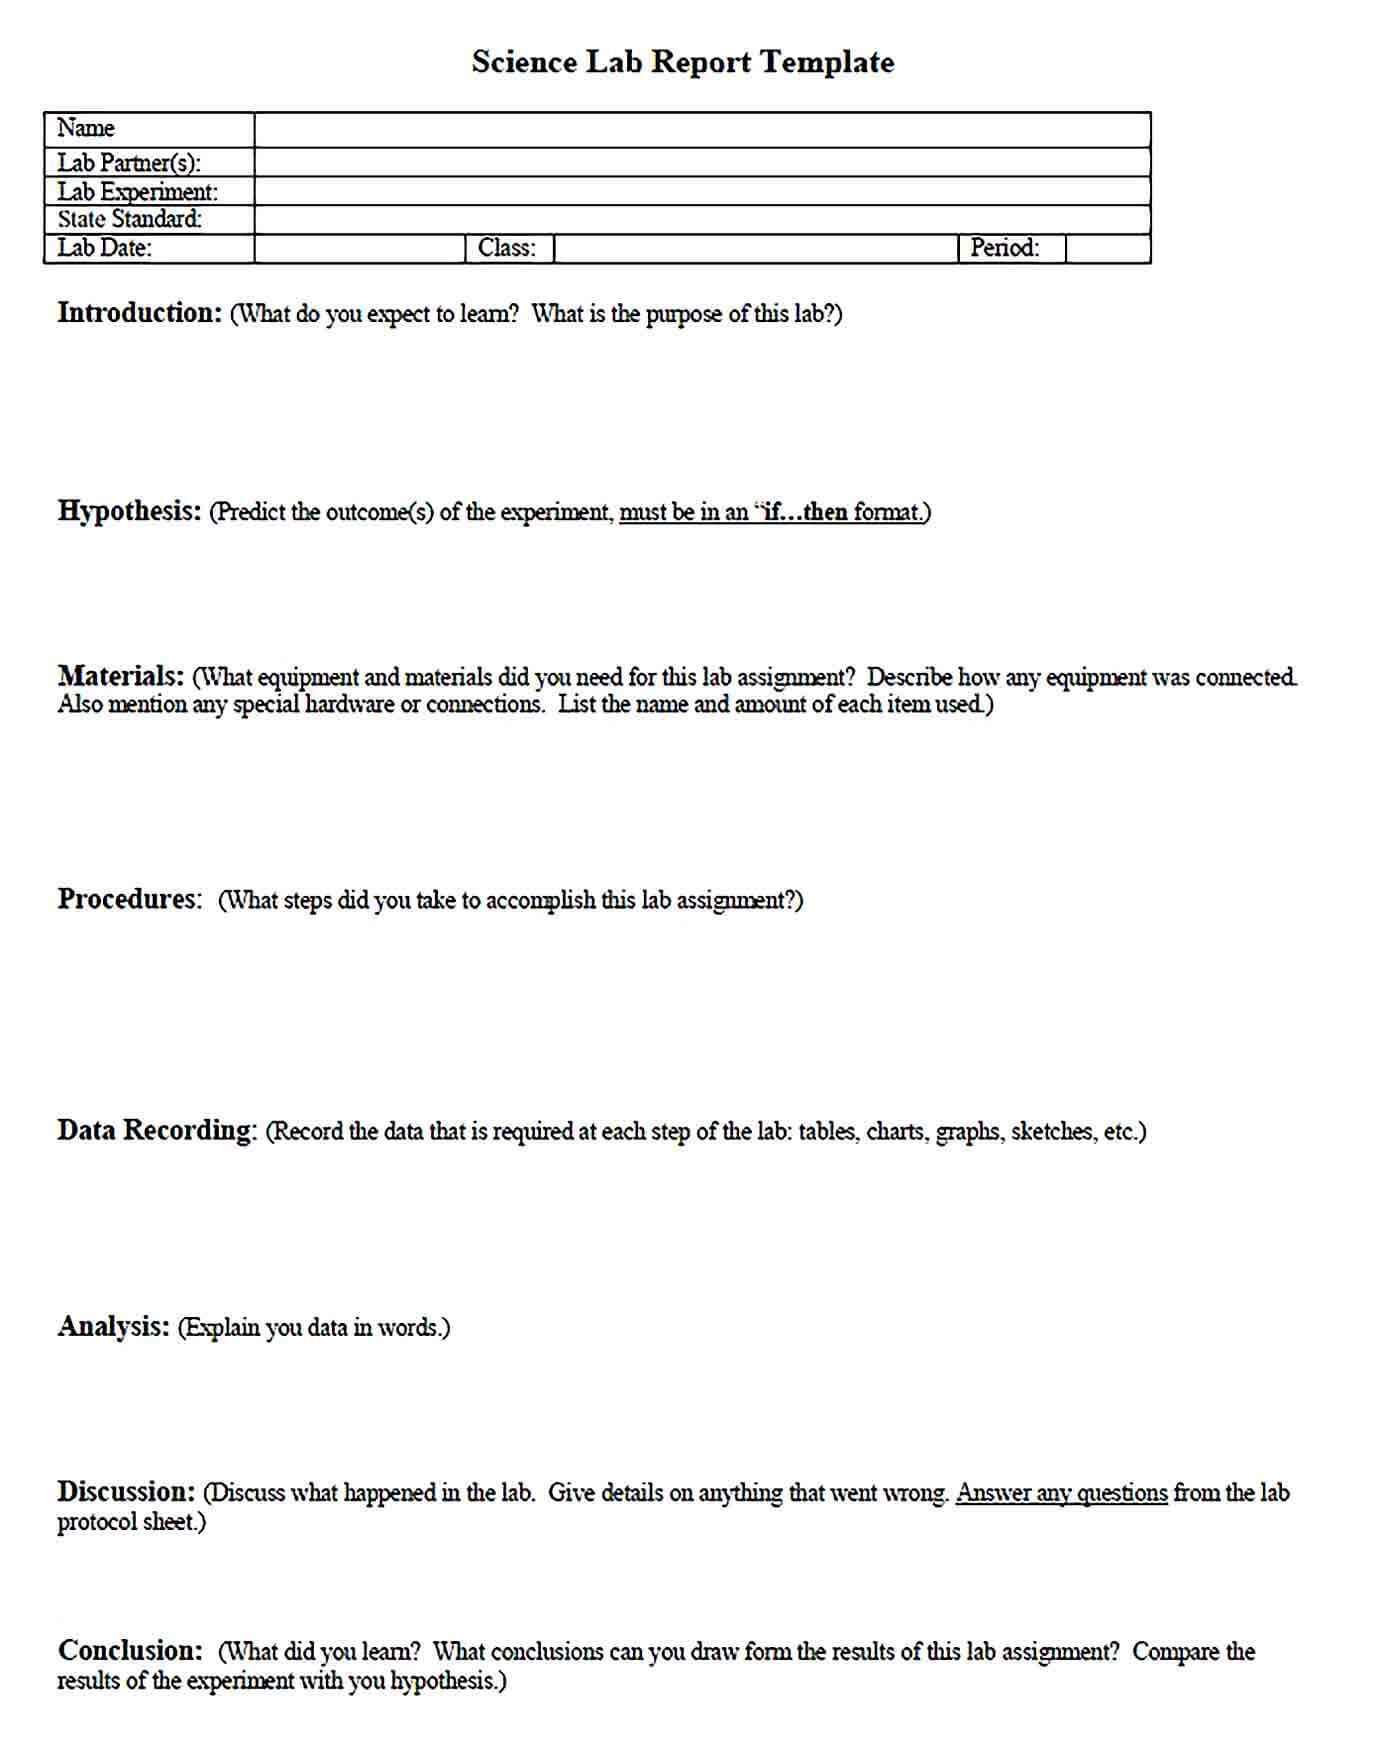 Sample Science Lab Report Template